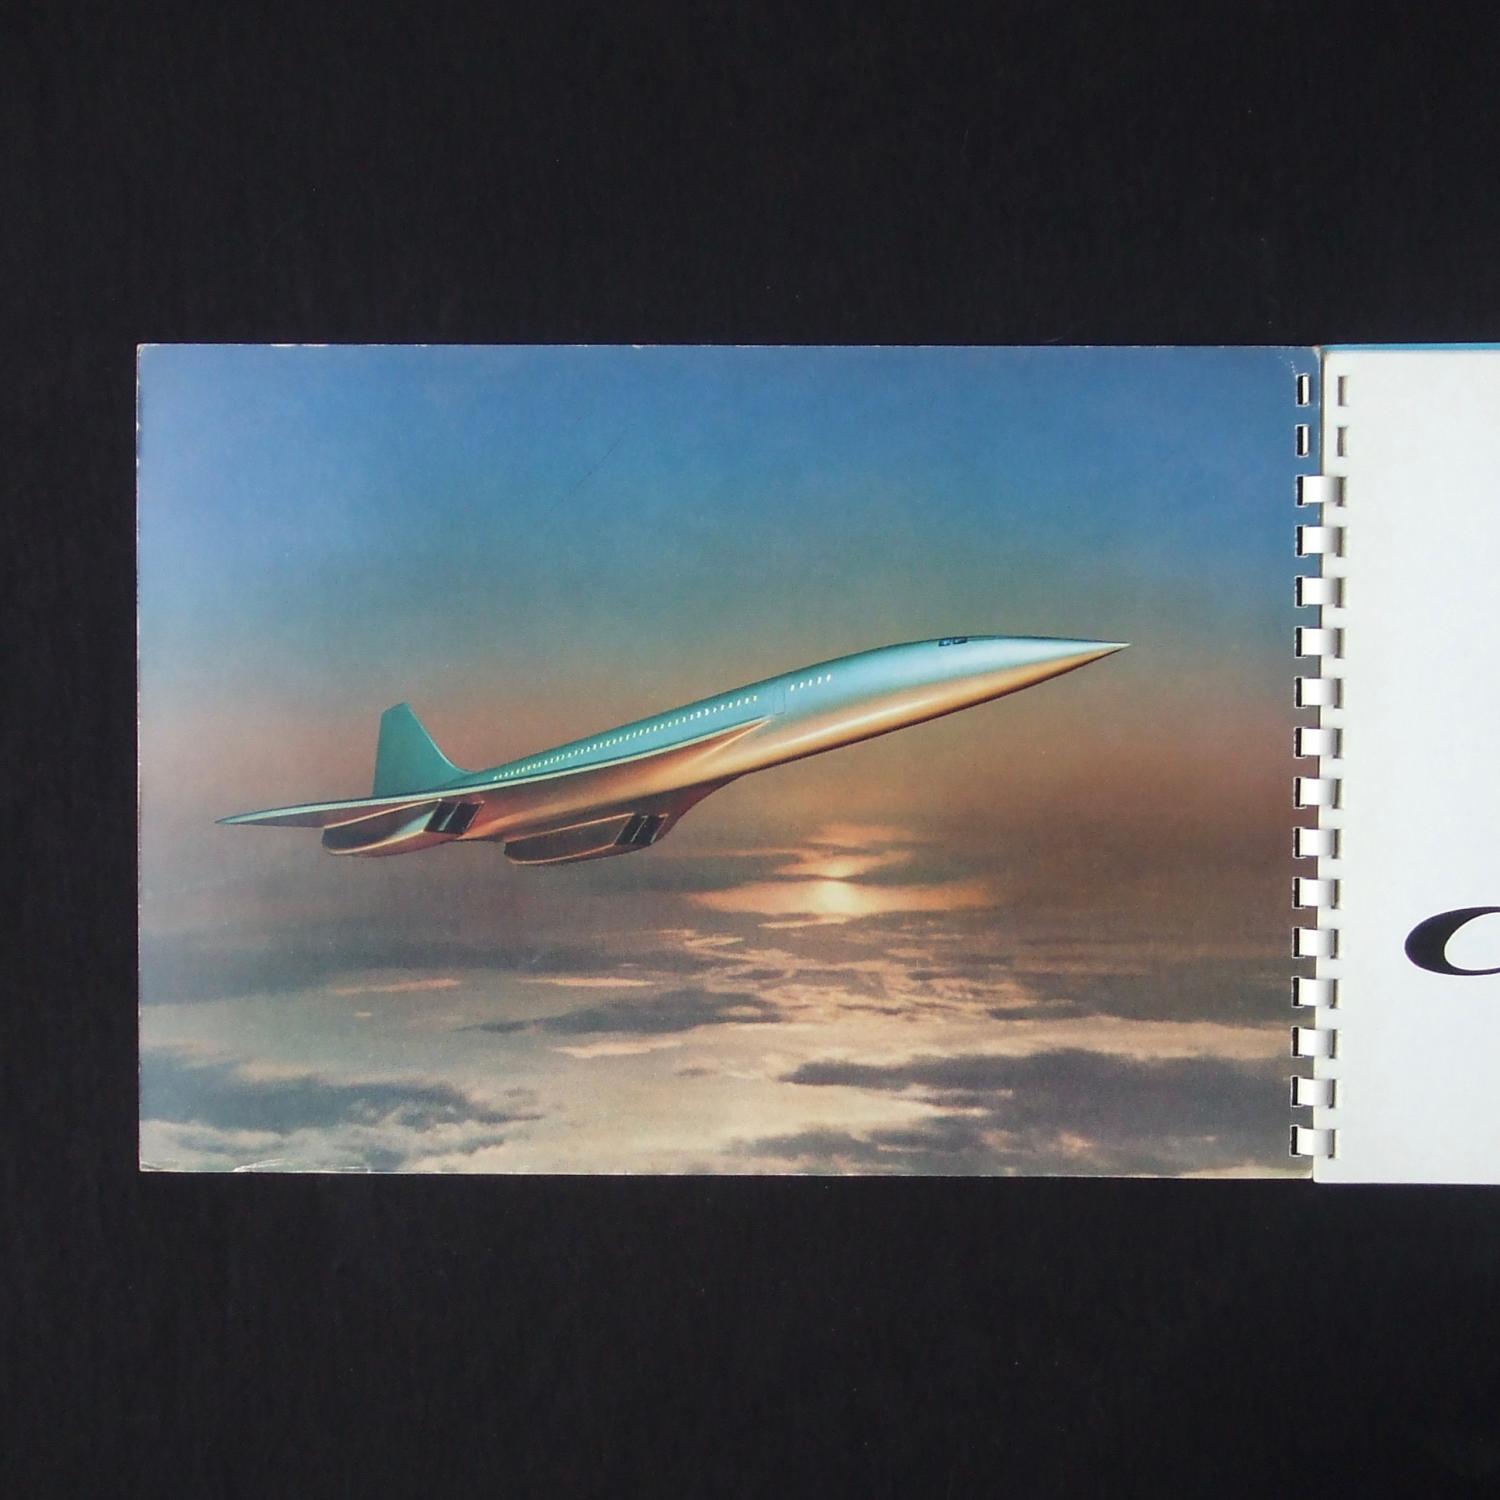 CONCORDE Brochure SUD AVIATION British Aircraft Corporation 66 Pages 